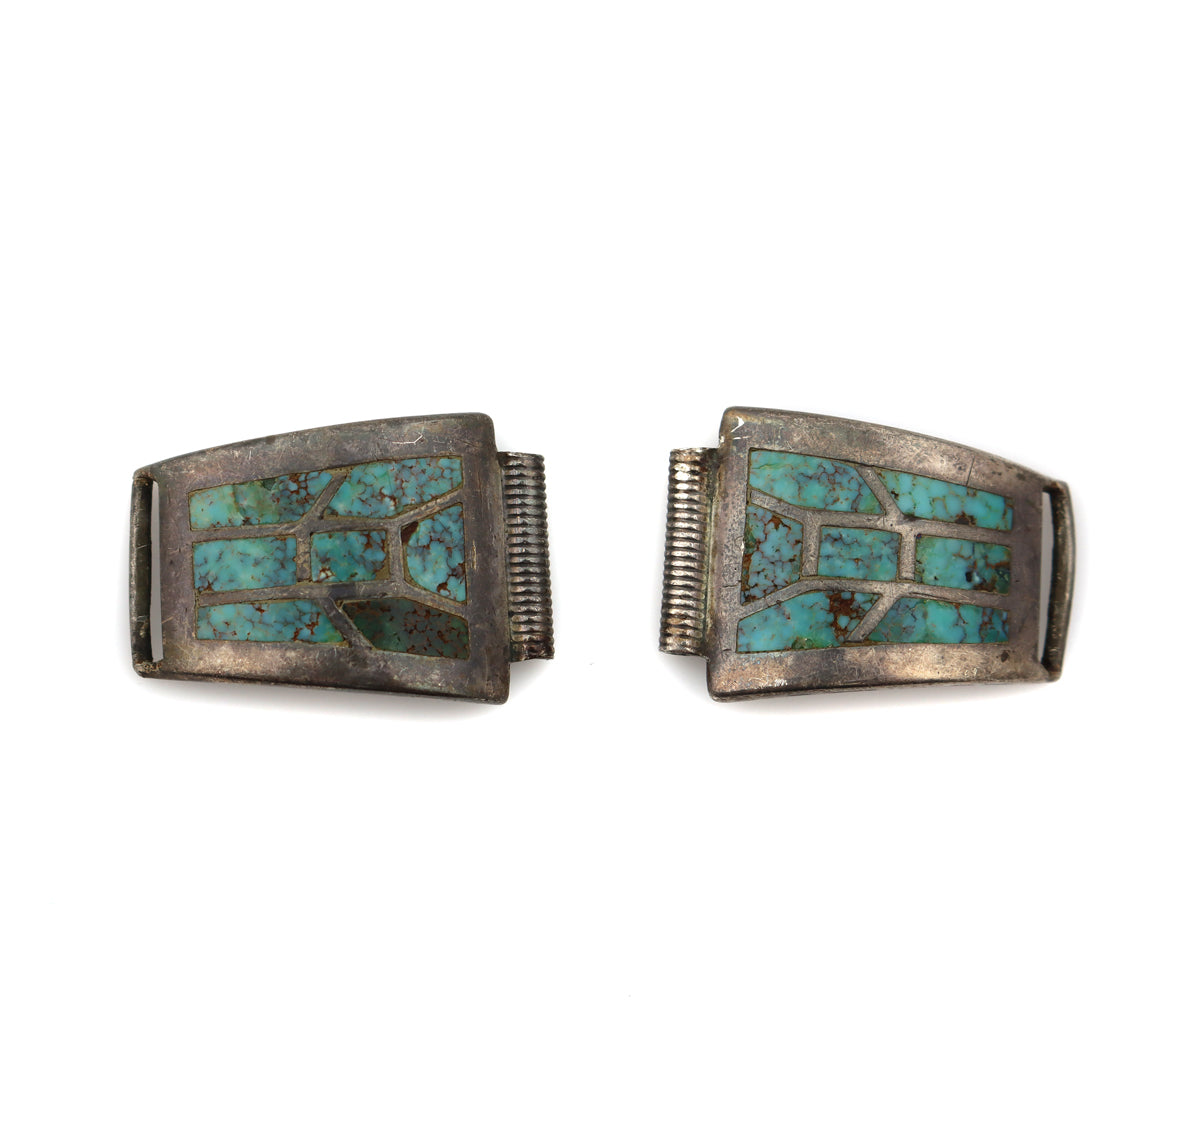 Zuni Turquoise Inlay and Silver Watchband Clips c. 1950s, 0.875" x 1.375", each (J13425)
